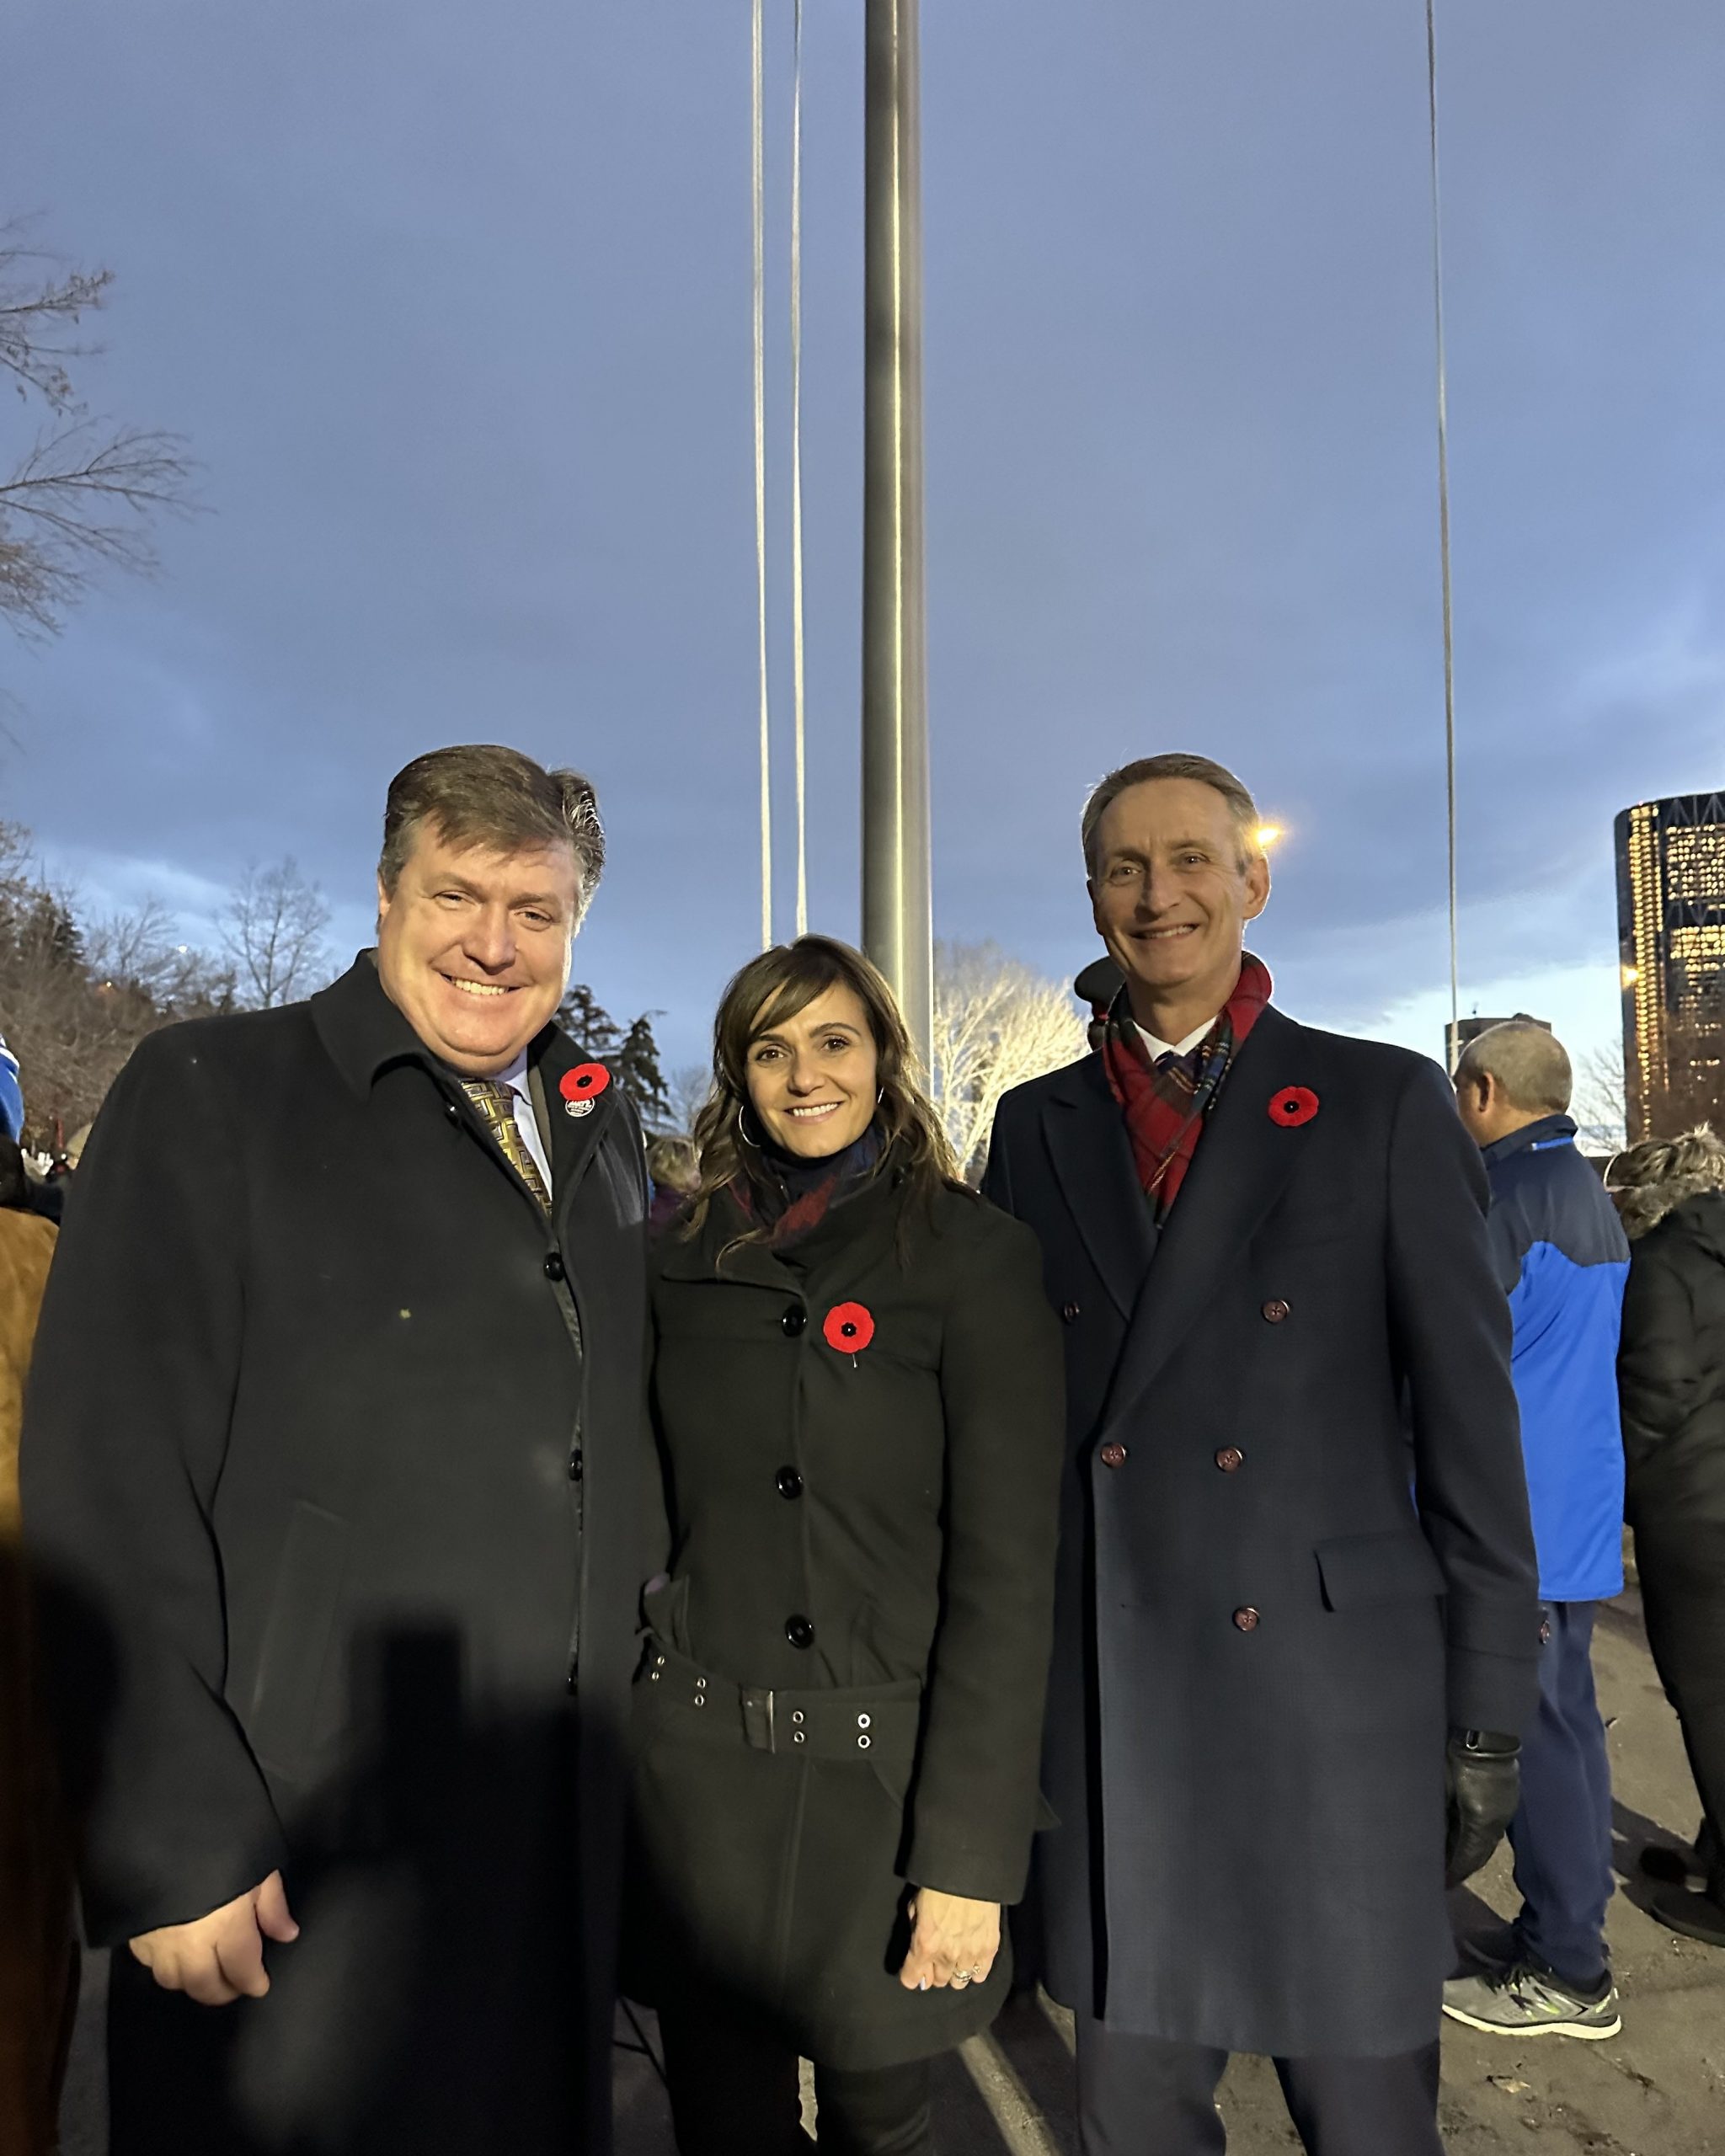 MP for Calgary-Rocky Ridge Pat Kelly, Councillor Sonya Sharp, and MP for Calgary-Centre Greg McLean at Remembrance Day ceremony